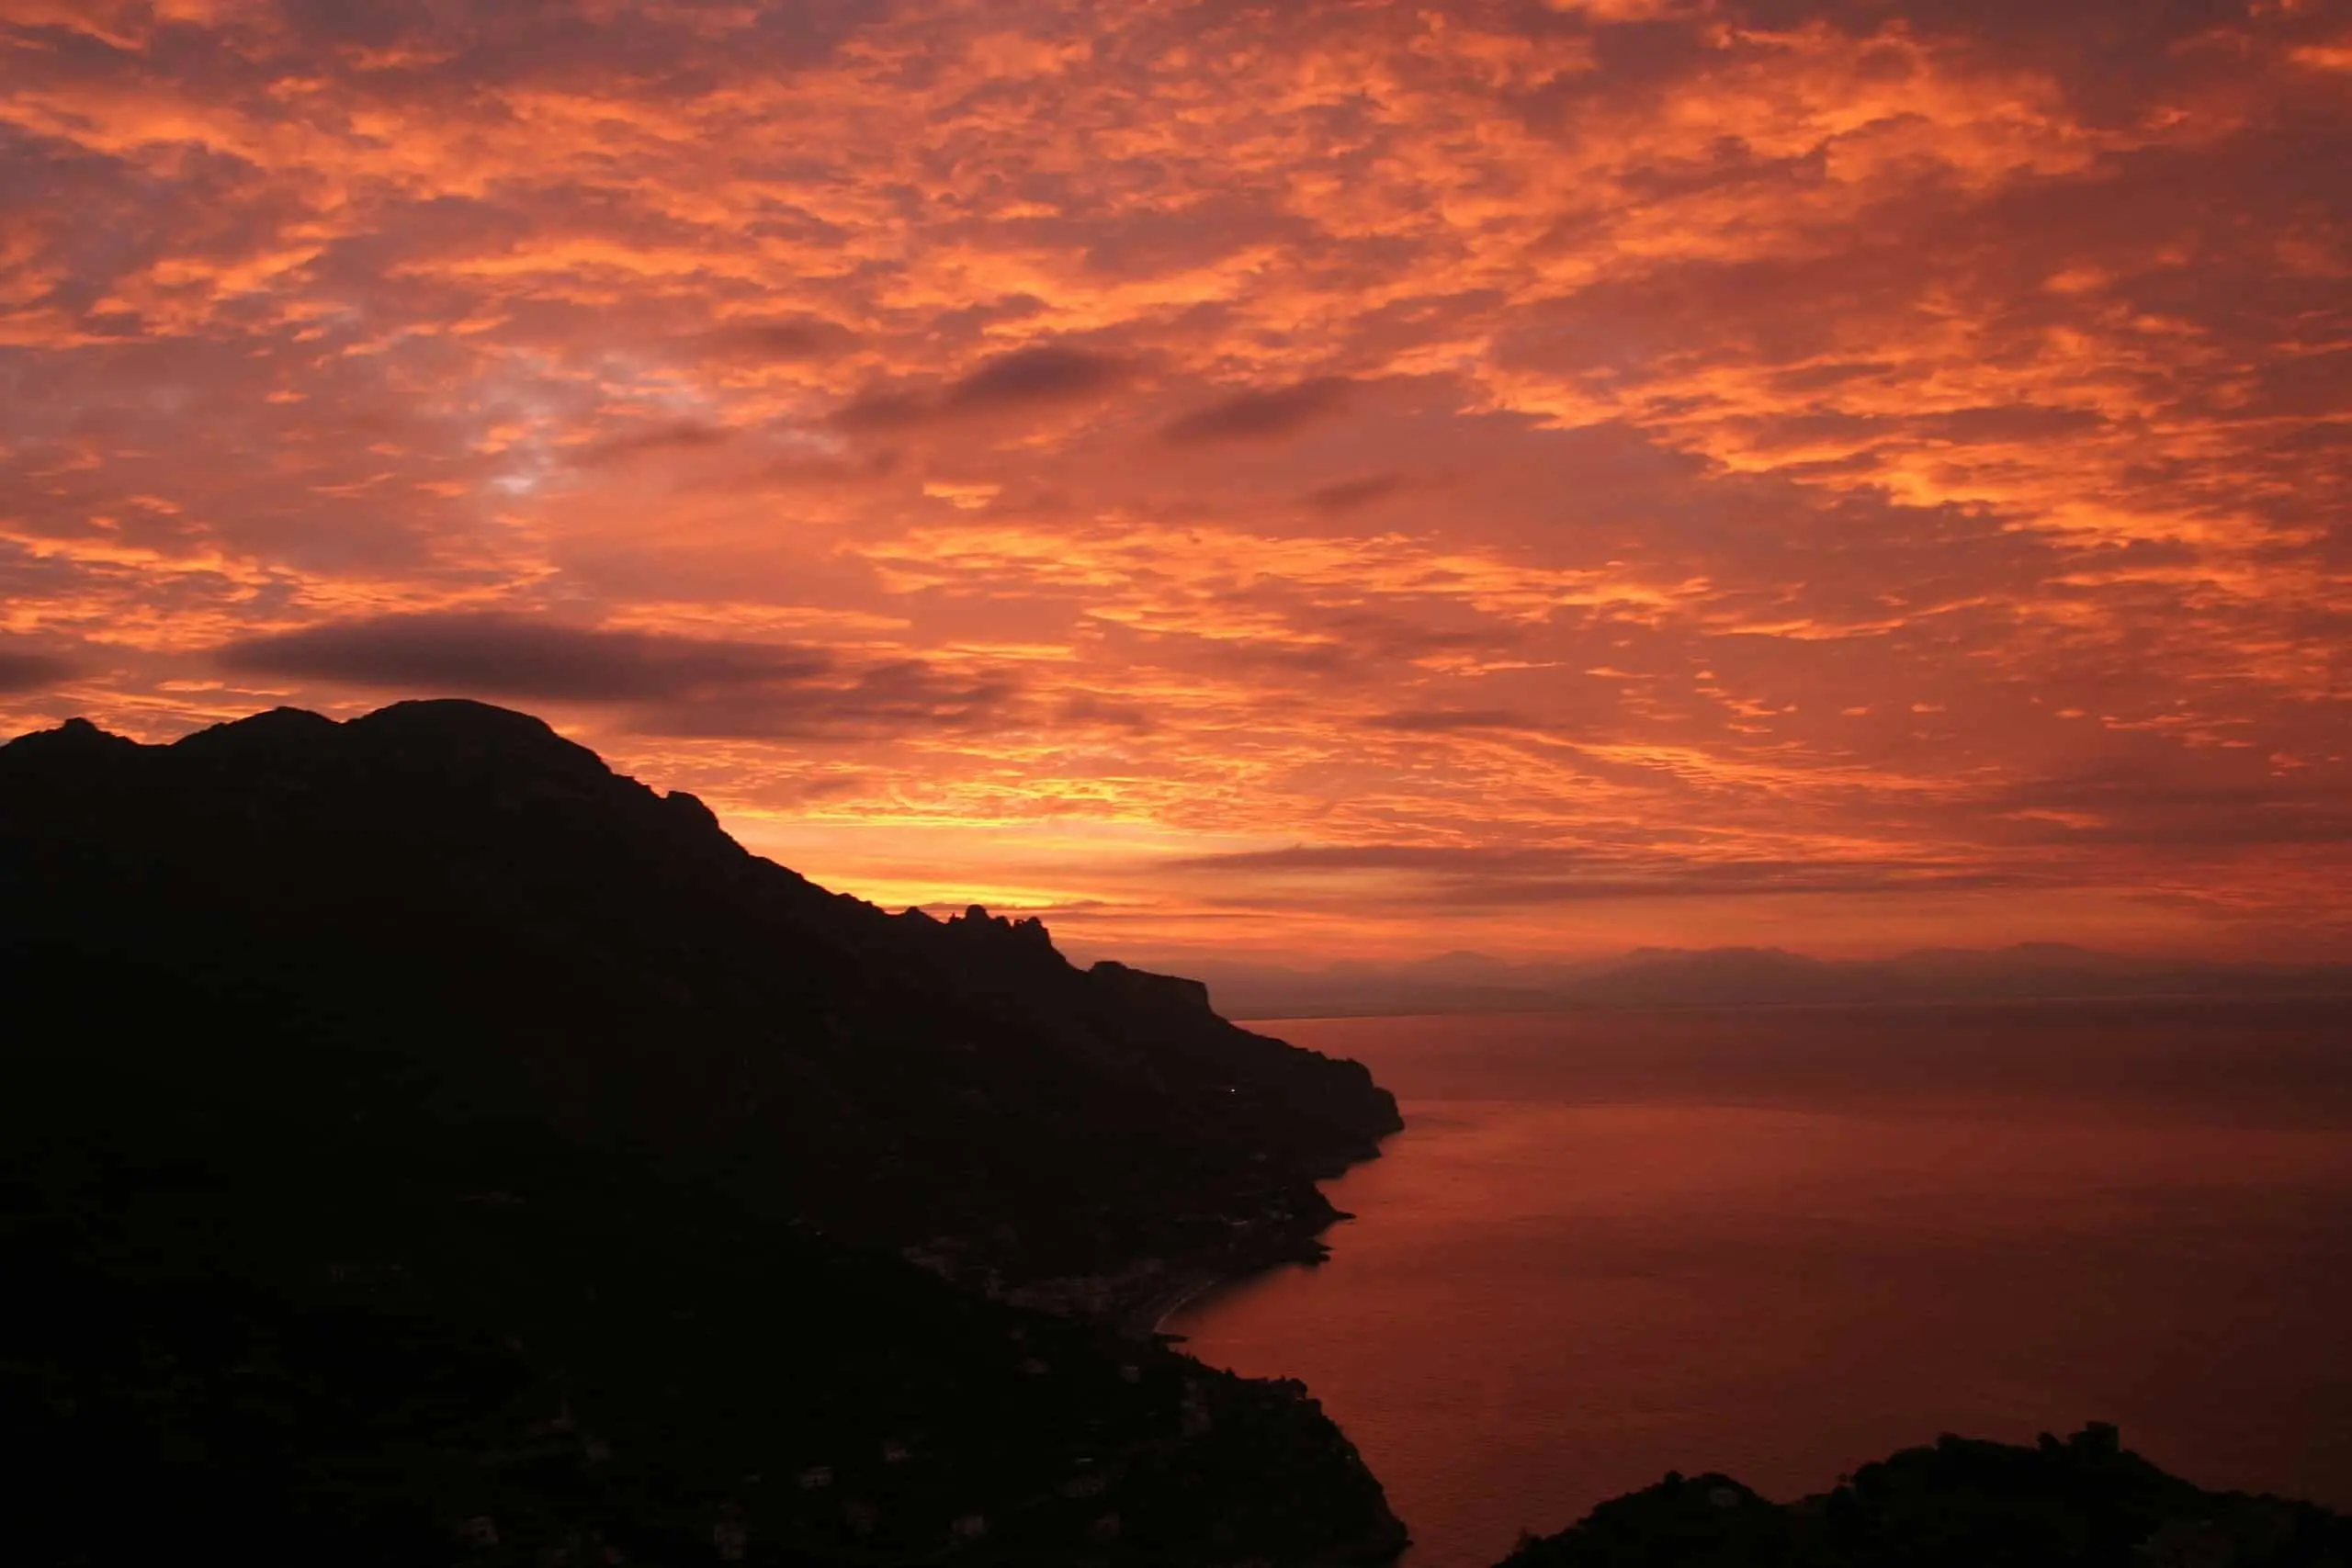 Sunrise at Ravello Dawn Concert in August